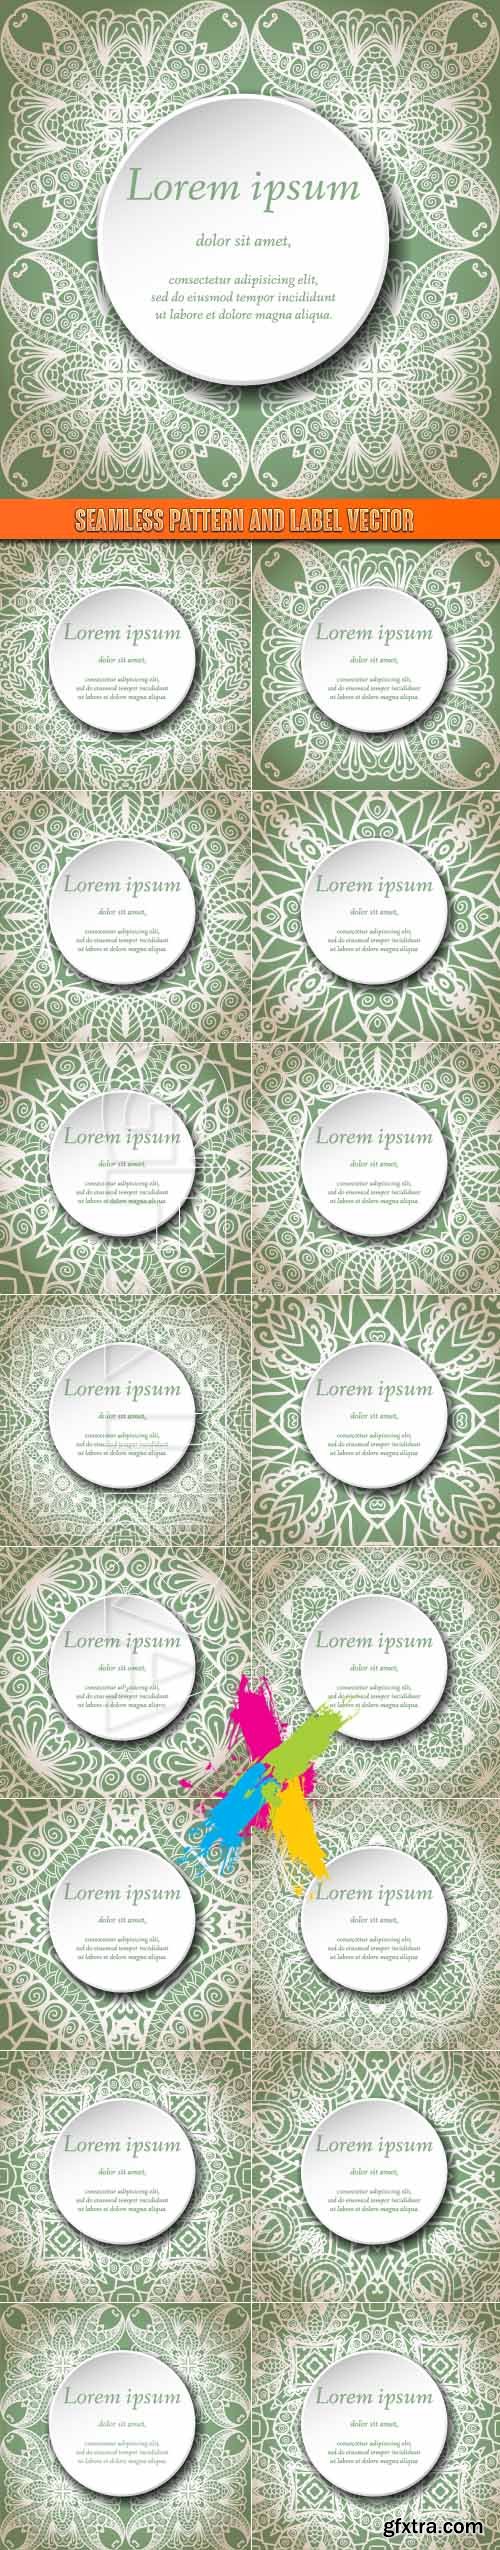 Seamless pattern and label vector